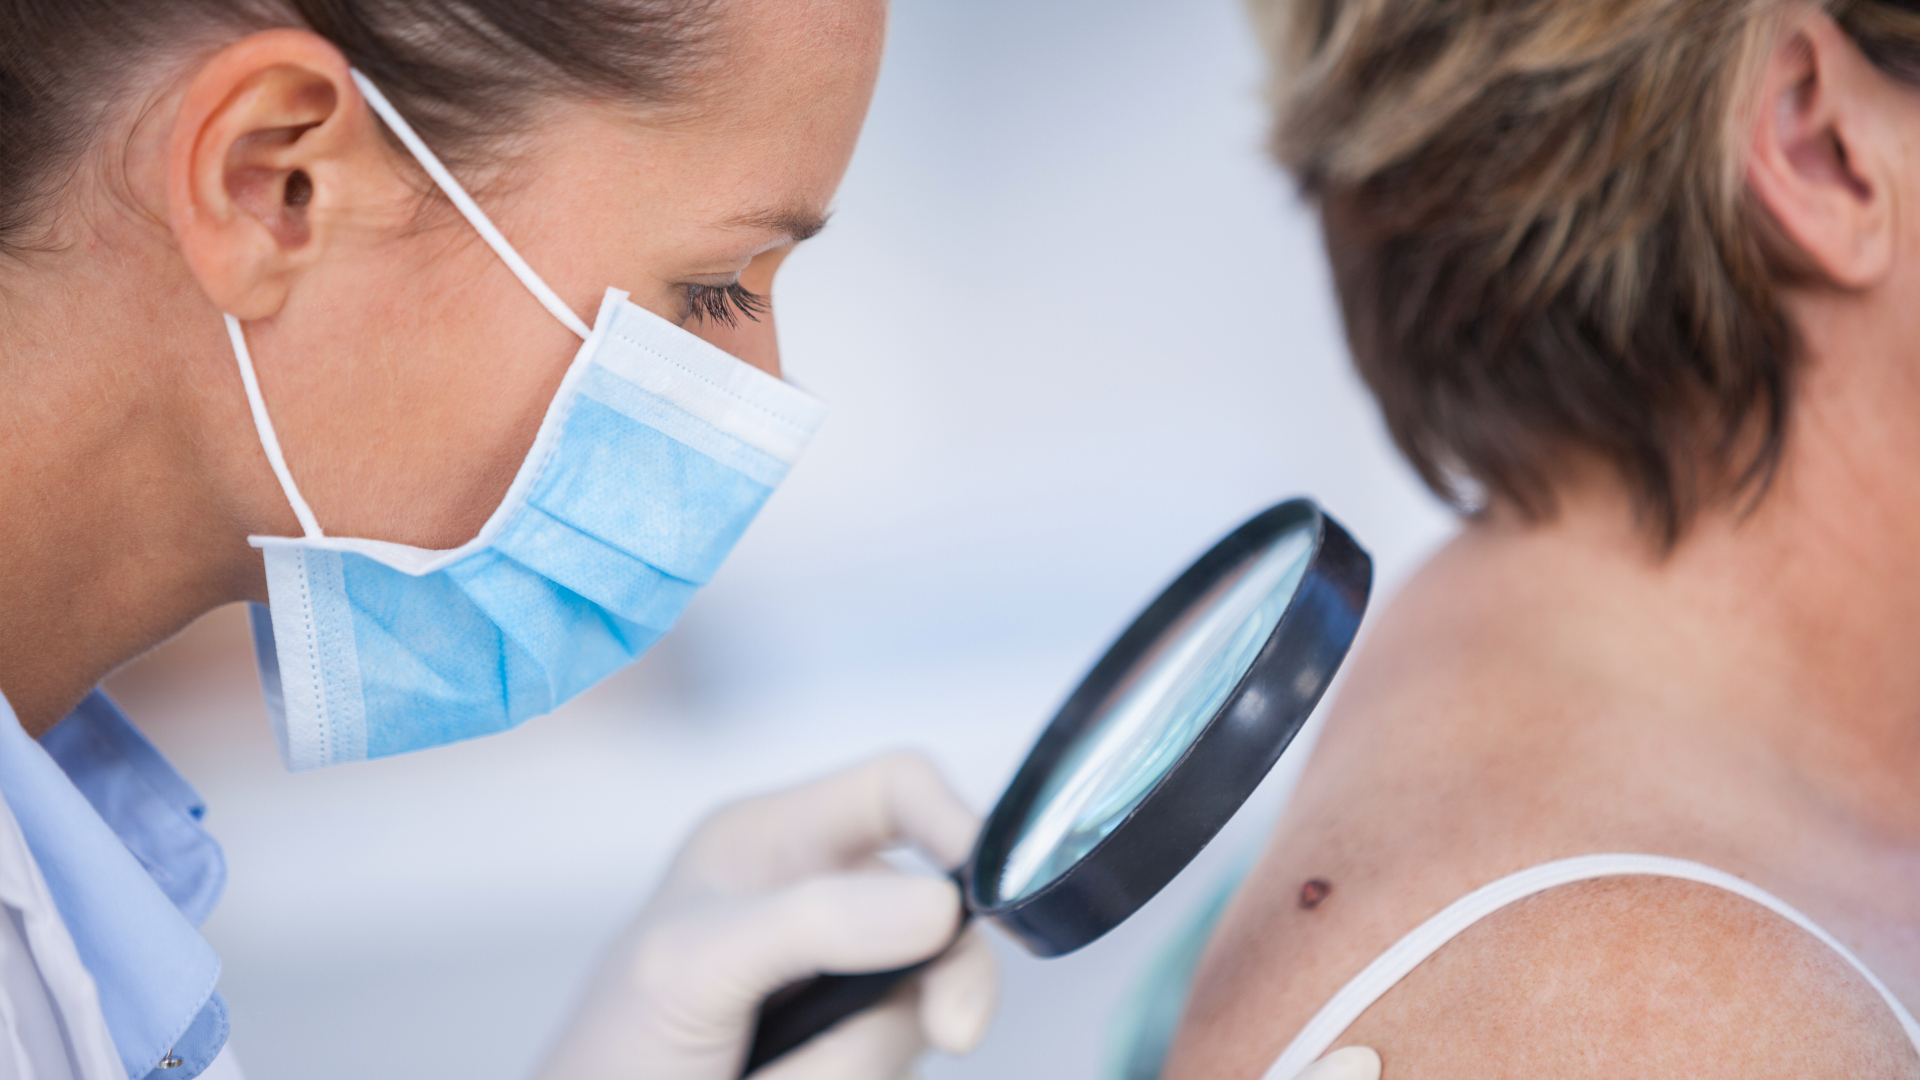 Doctor evaluates patient's mole for signs of melanoma